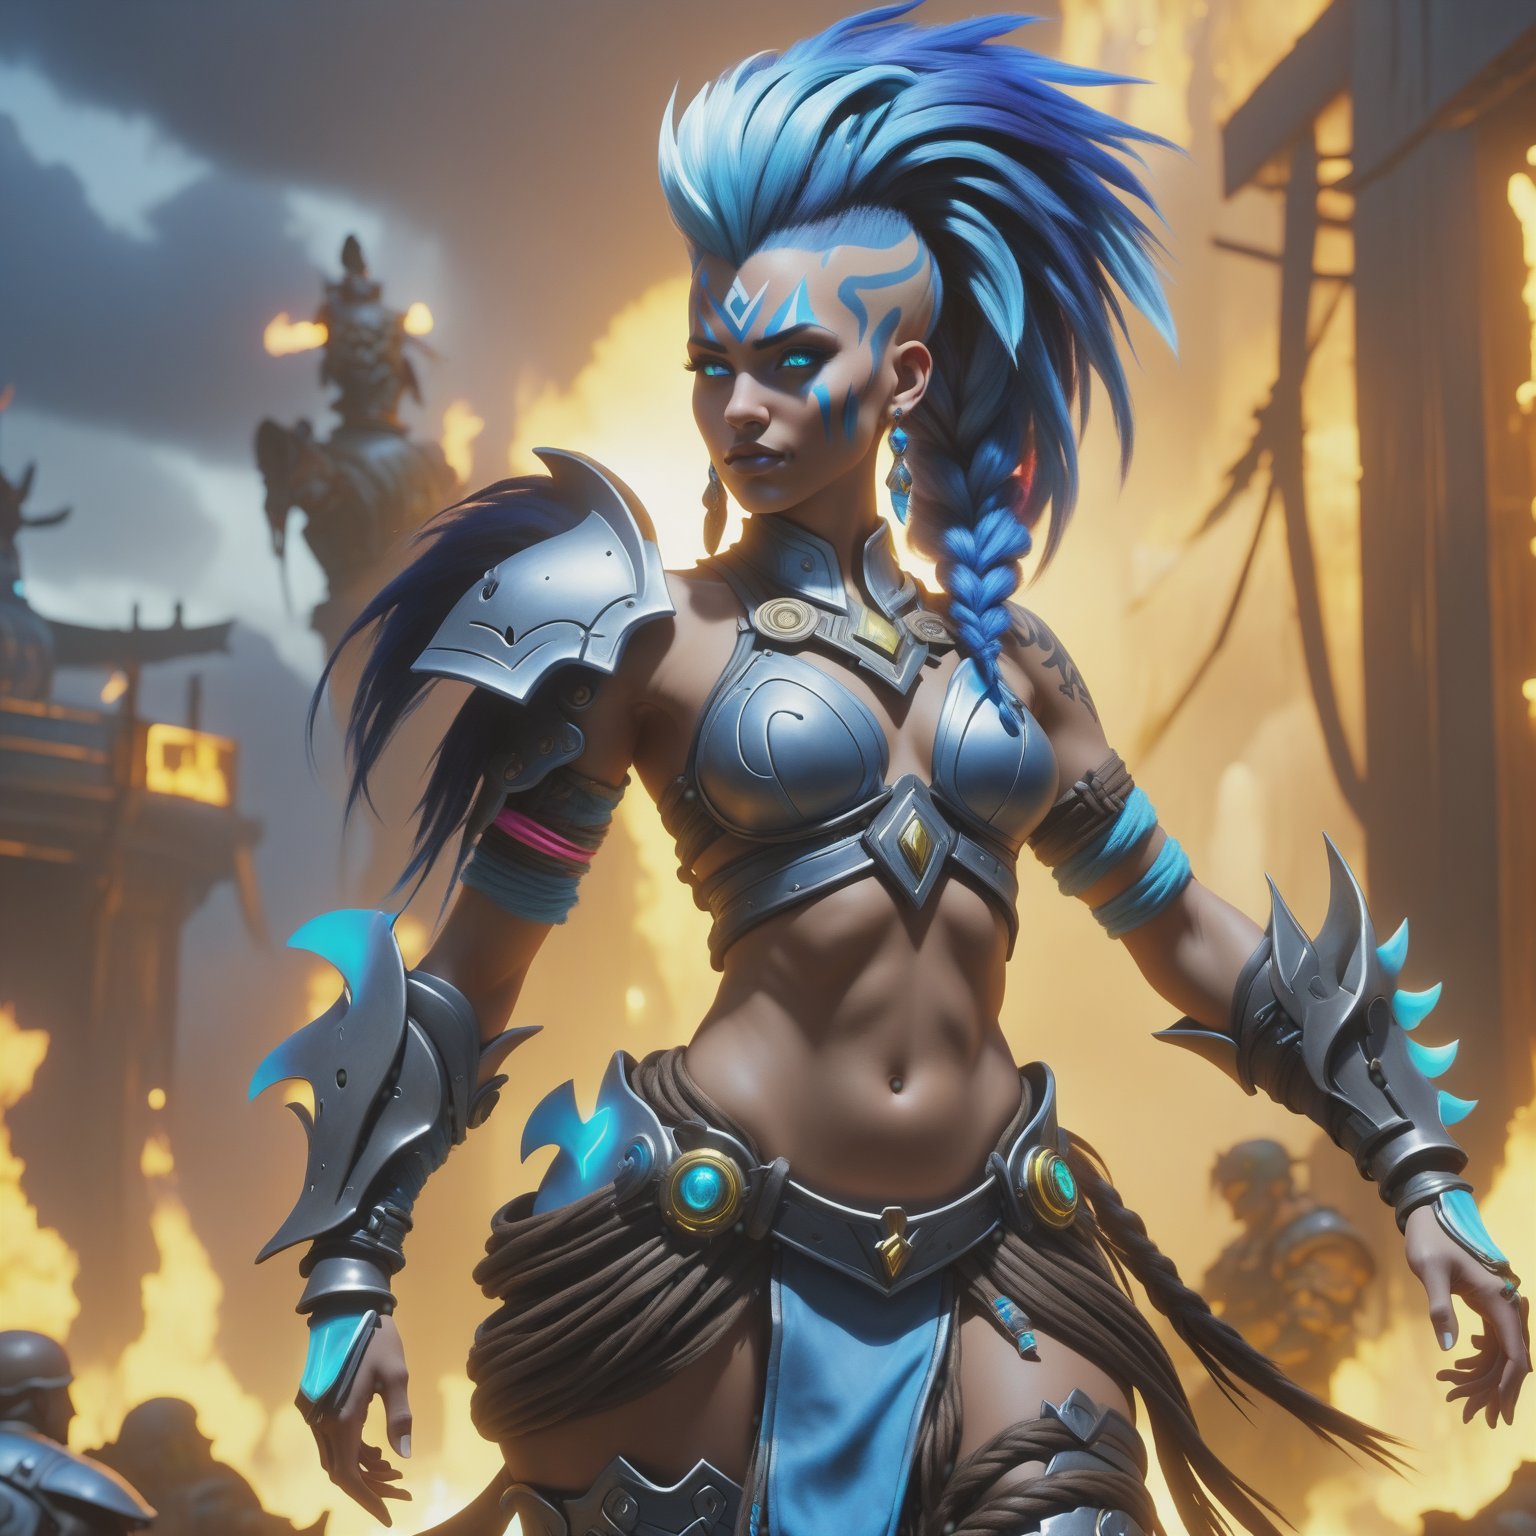 (best quality), (4K, HDR), ((OverwatchxDark Fantasy)),barbarian junker queen, tall woman, blue mohawk hair braids, shining body, glowing look, looking at camera, fallout style armor and clothing, fantasy, vibrant colors,  dark ,DonM3l3m3nt4lXL